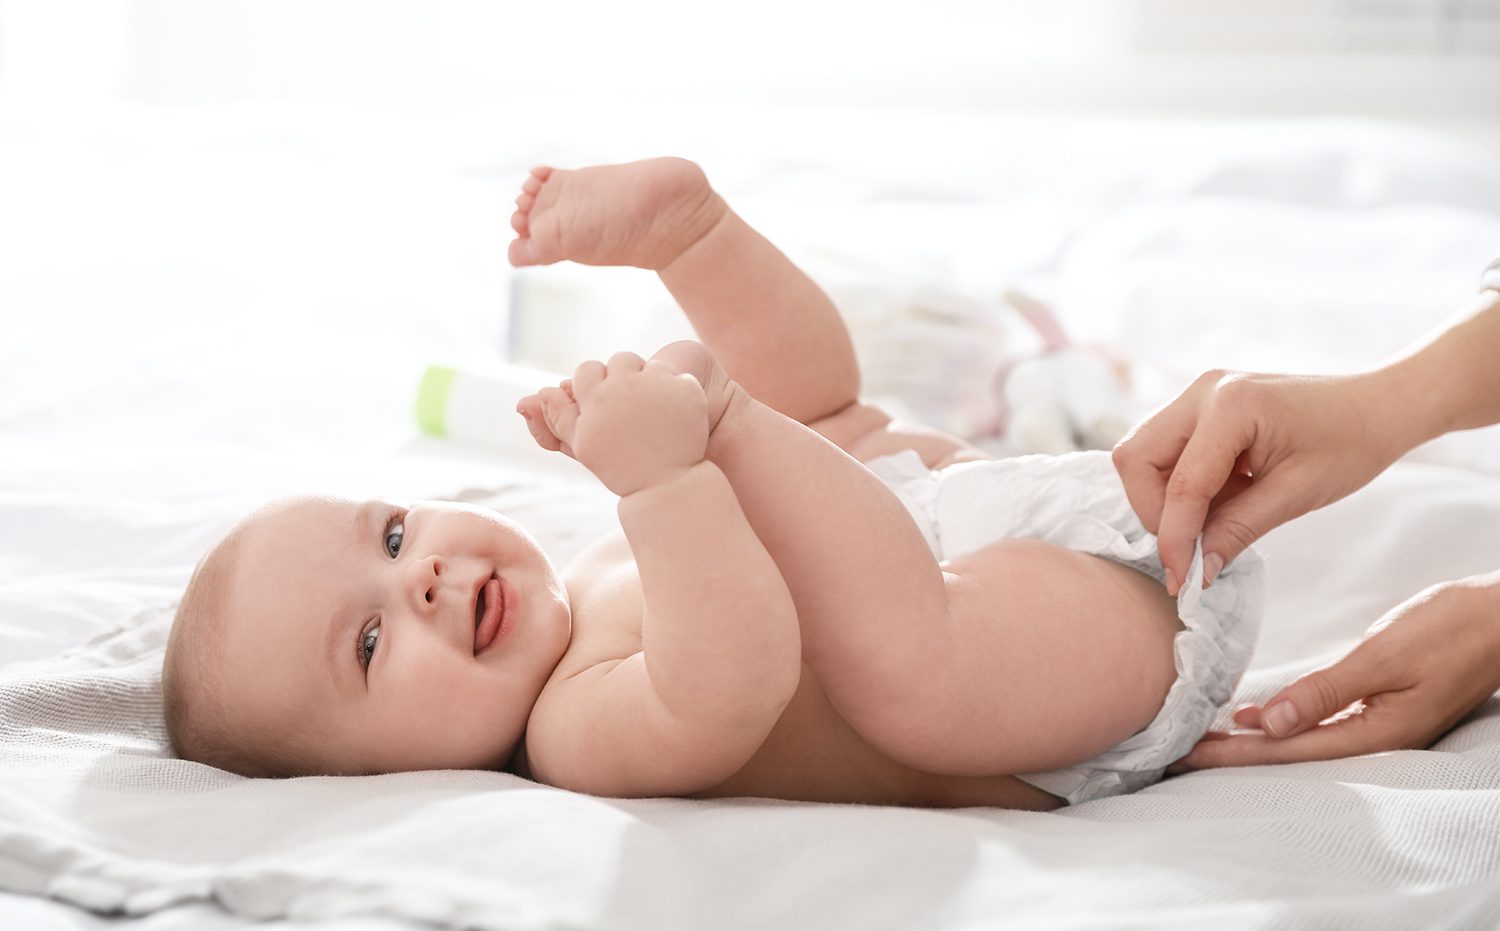 5 Precautions To Take Care While Using Diapers For Babies